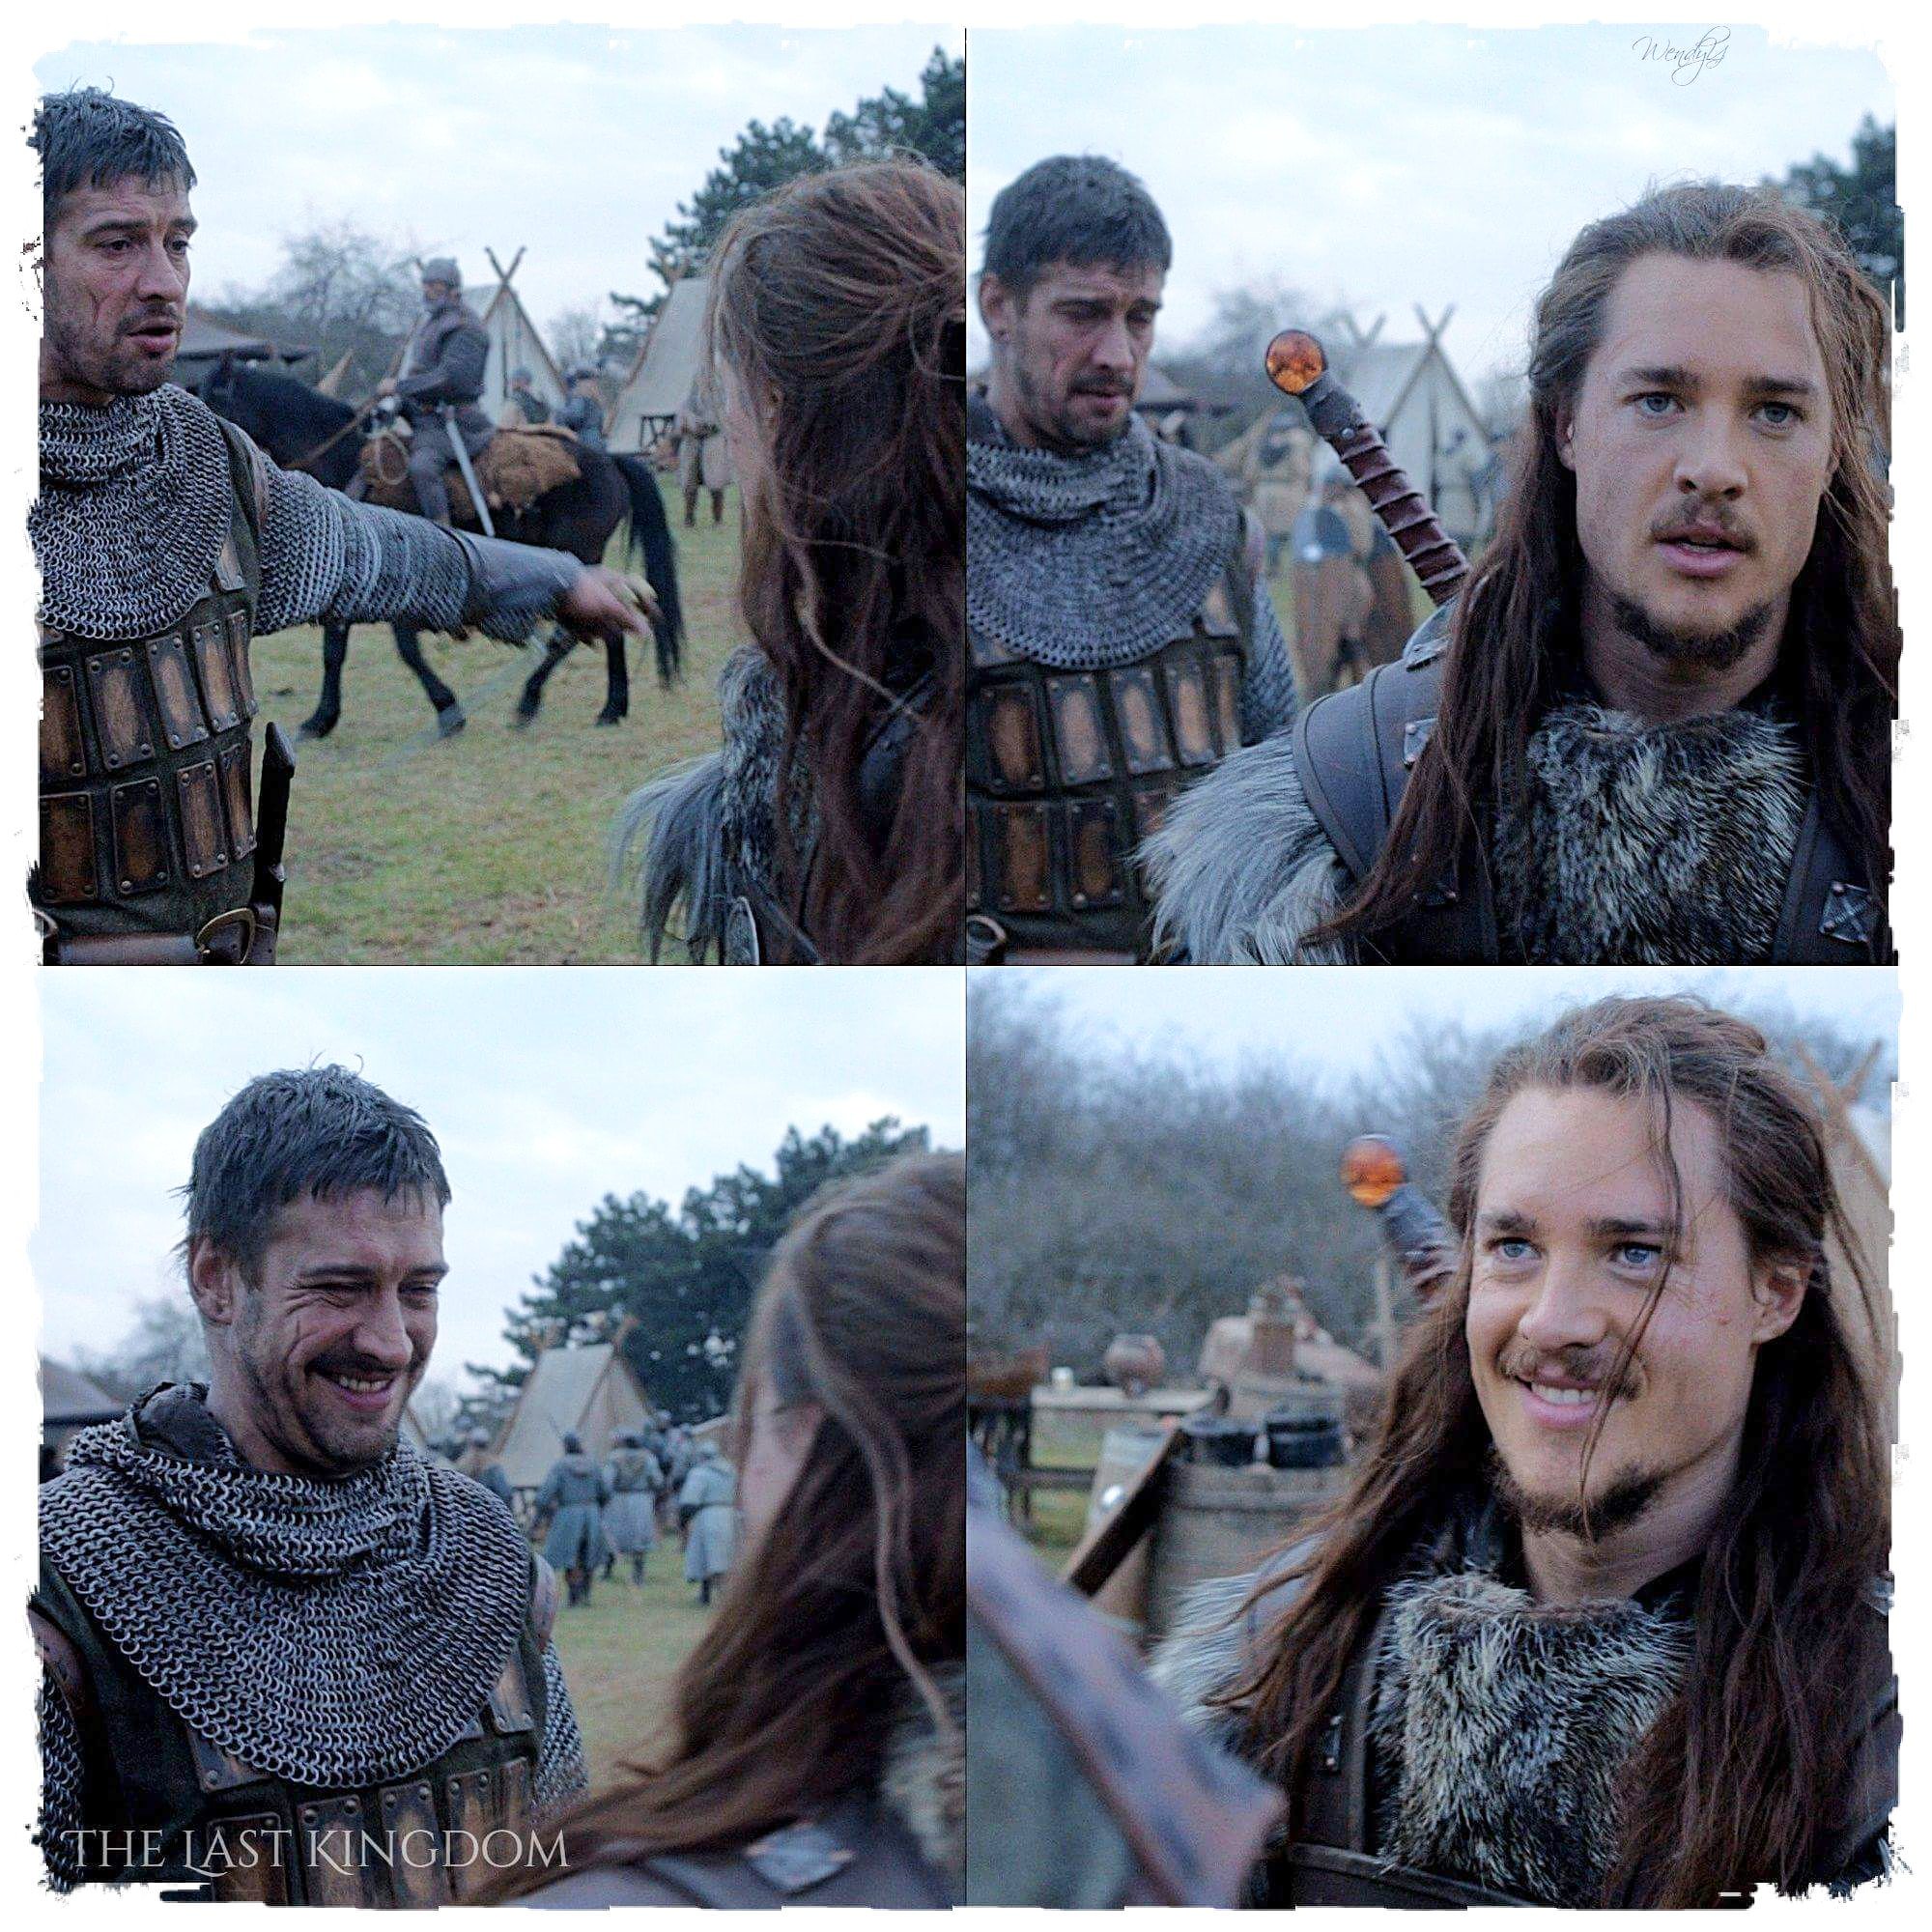 Wendy on X: Uhtred and Beocca 💙 #TheLastKingdom #Uhtred #Beocca